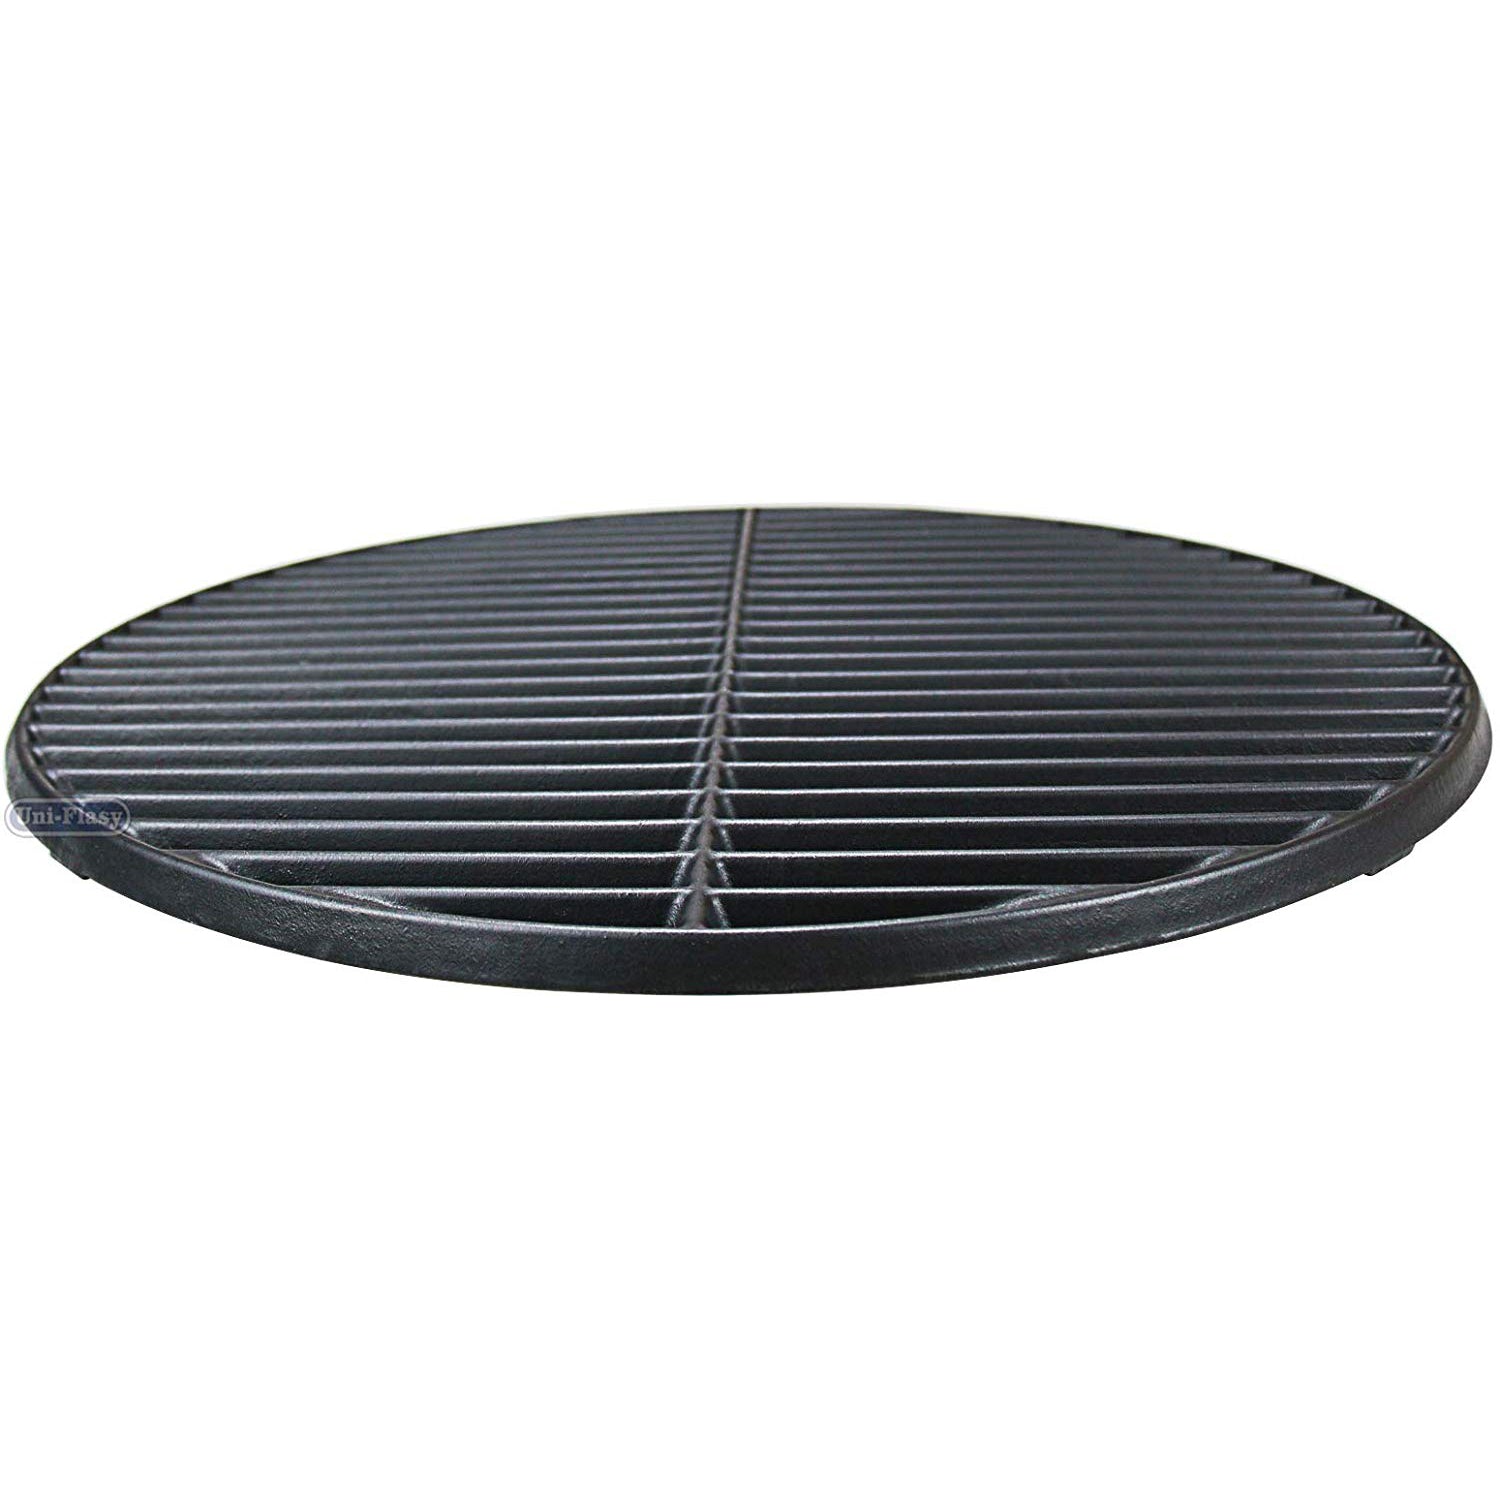 BBQ Cooking Grate 18 3/16 for Large Big Green Egg Vision Grill